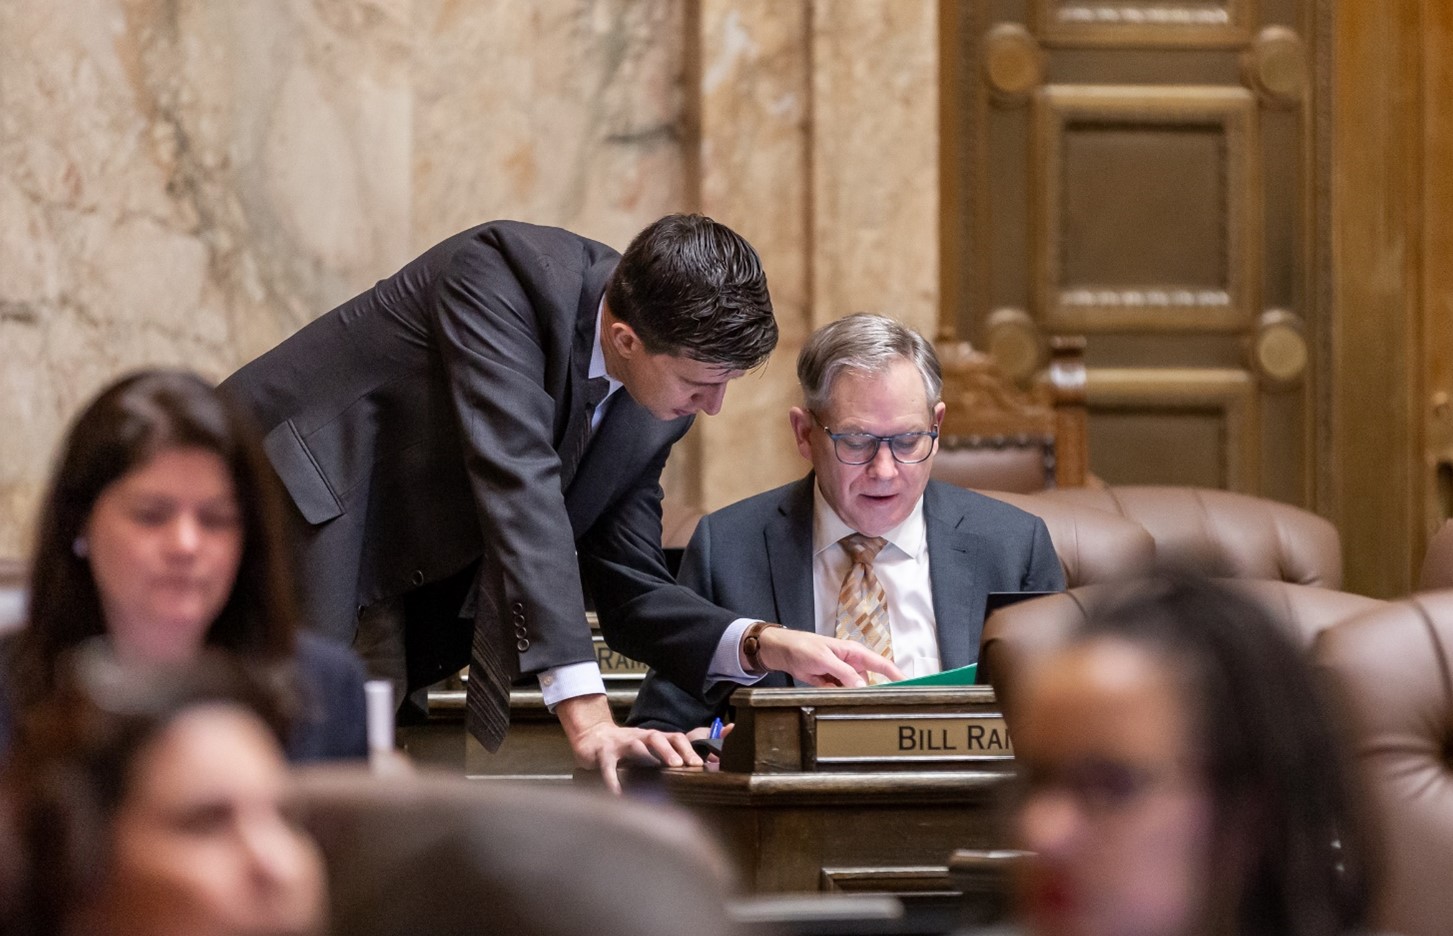 Rep. Ramel standing over a sitting Rep. Ramos at his desk on the House floor. Ramel stands to his right. Both are wearing gray suits, and are deeply focused on the topic at hand.